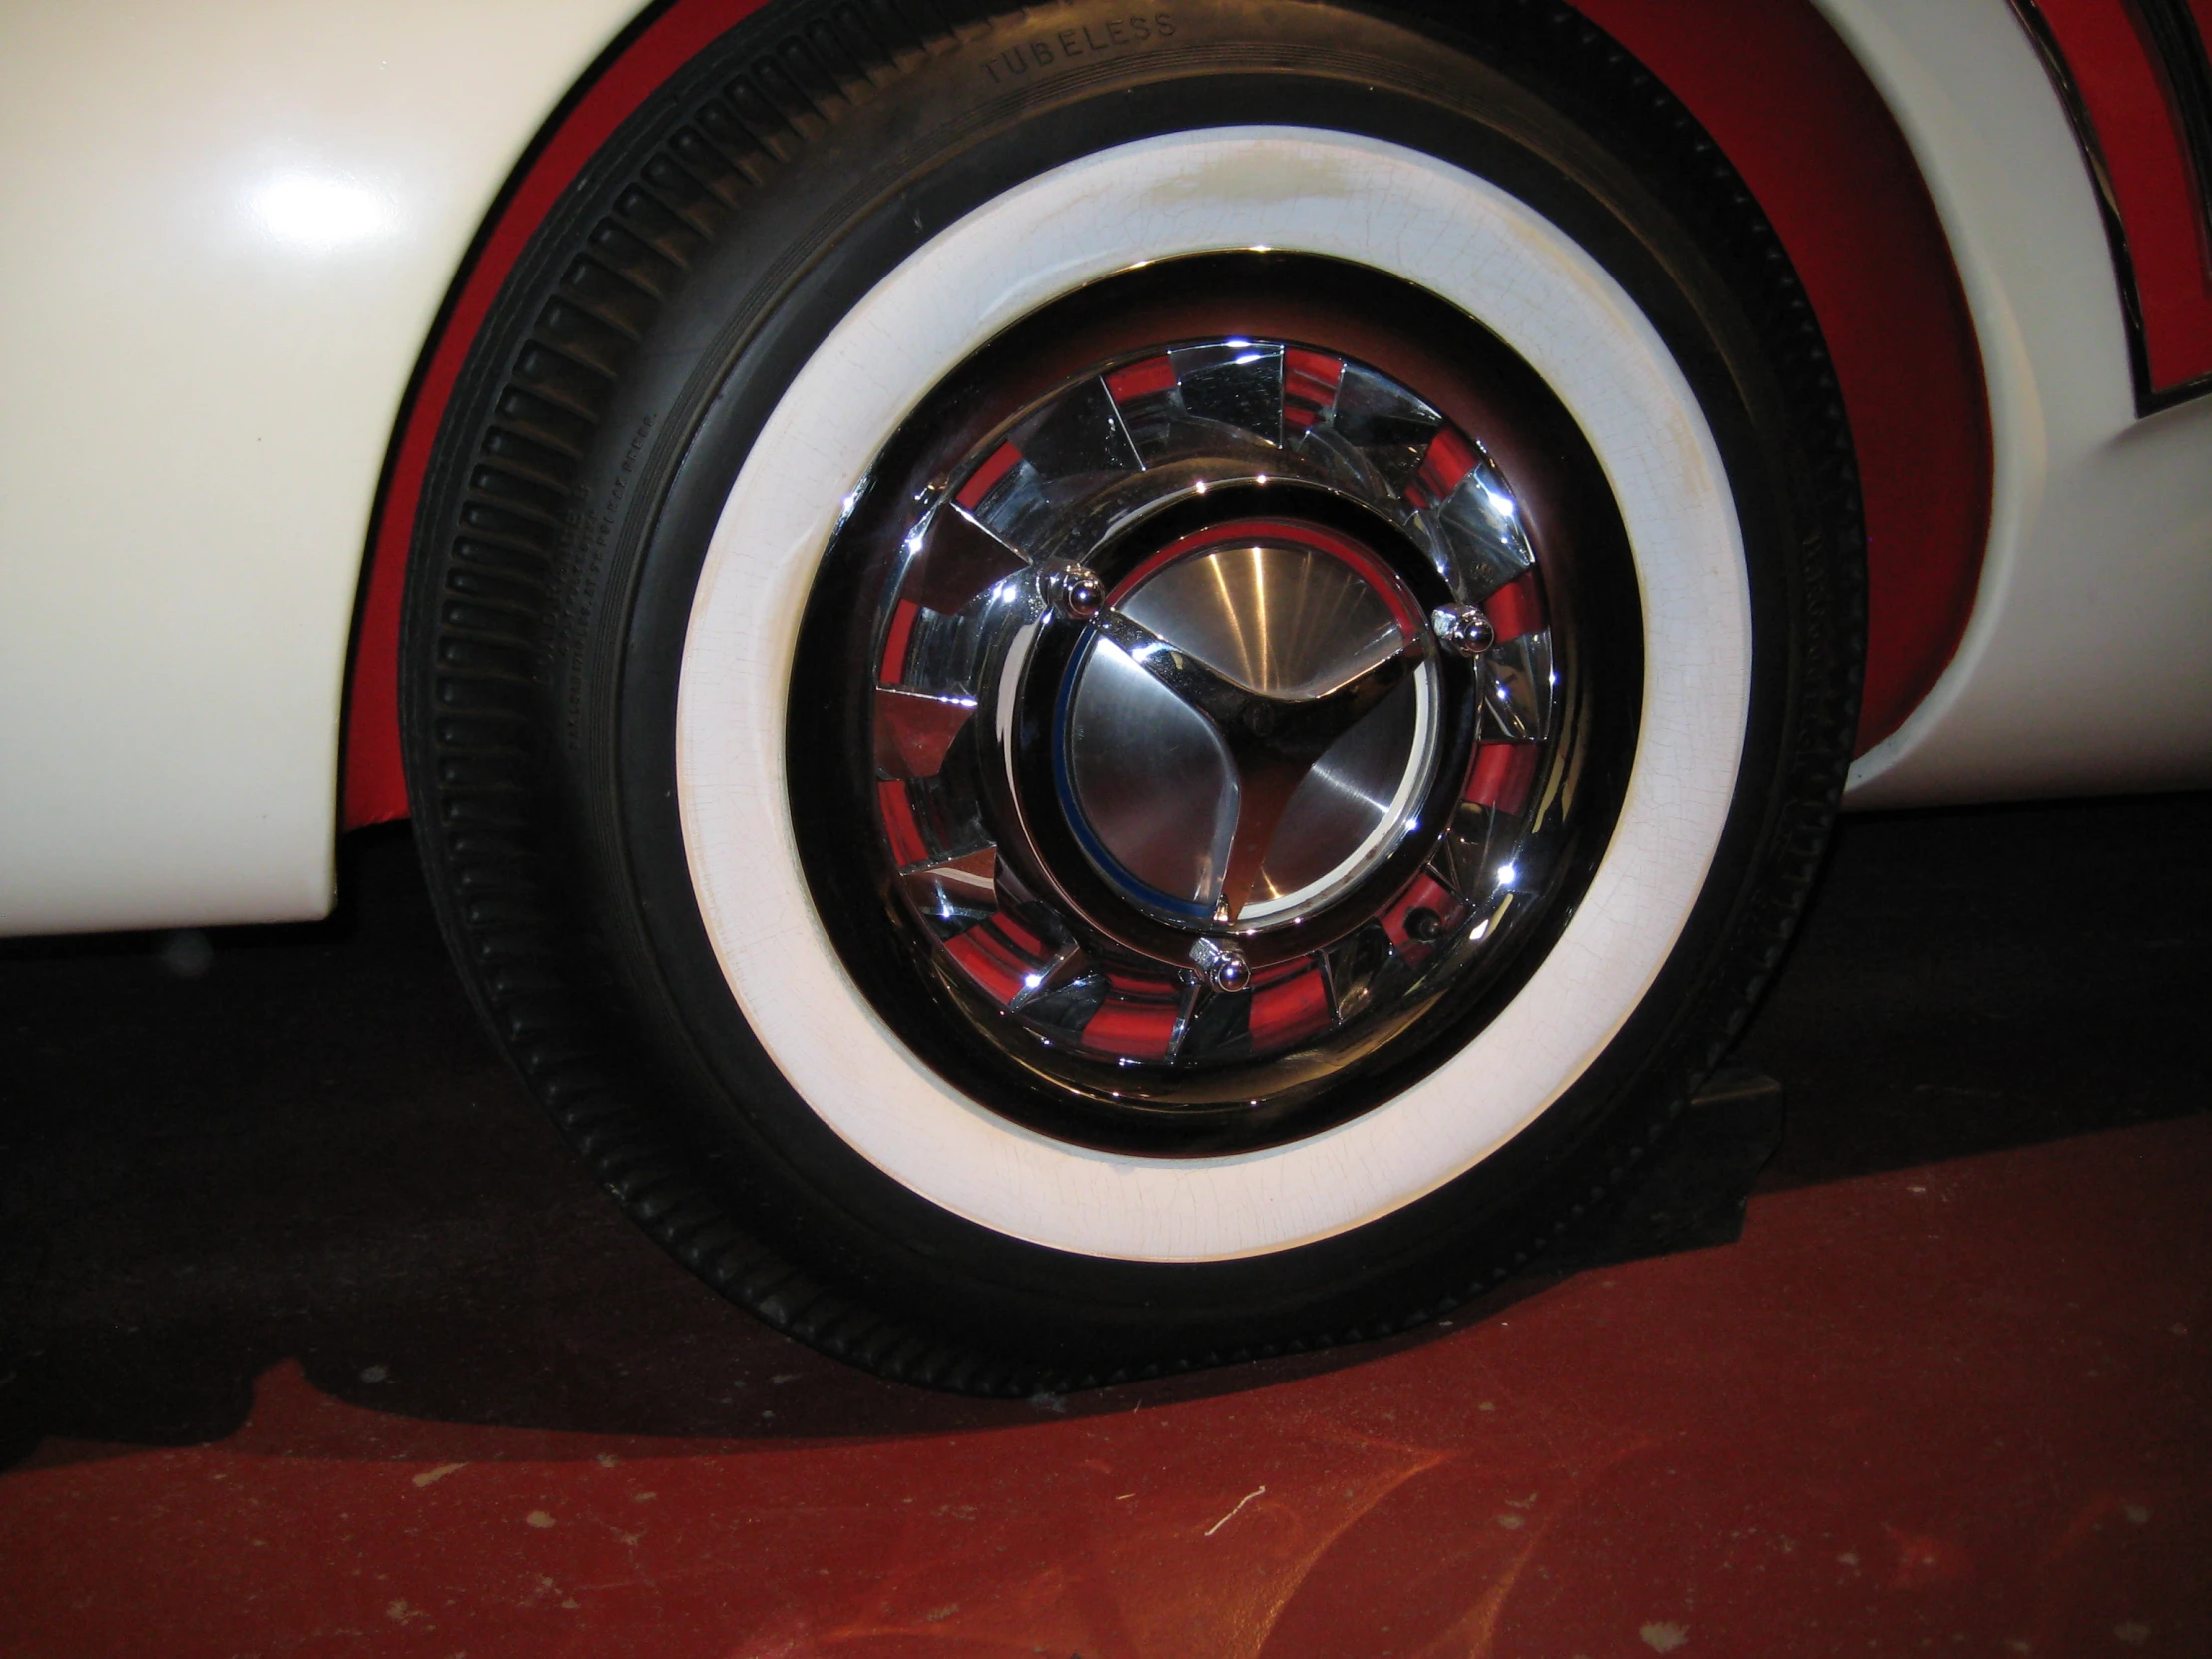 the white tire of the small, elegant vehicle